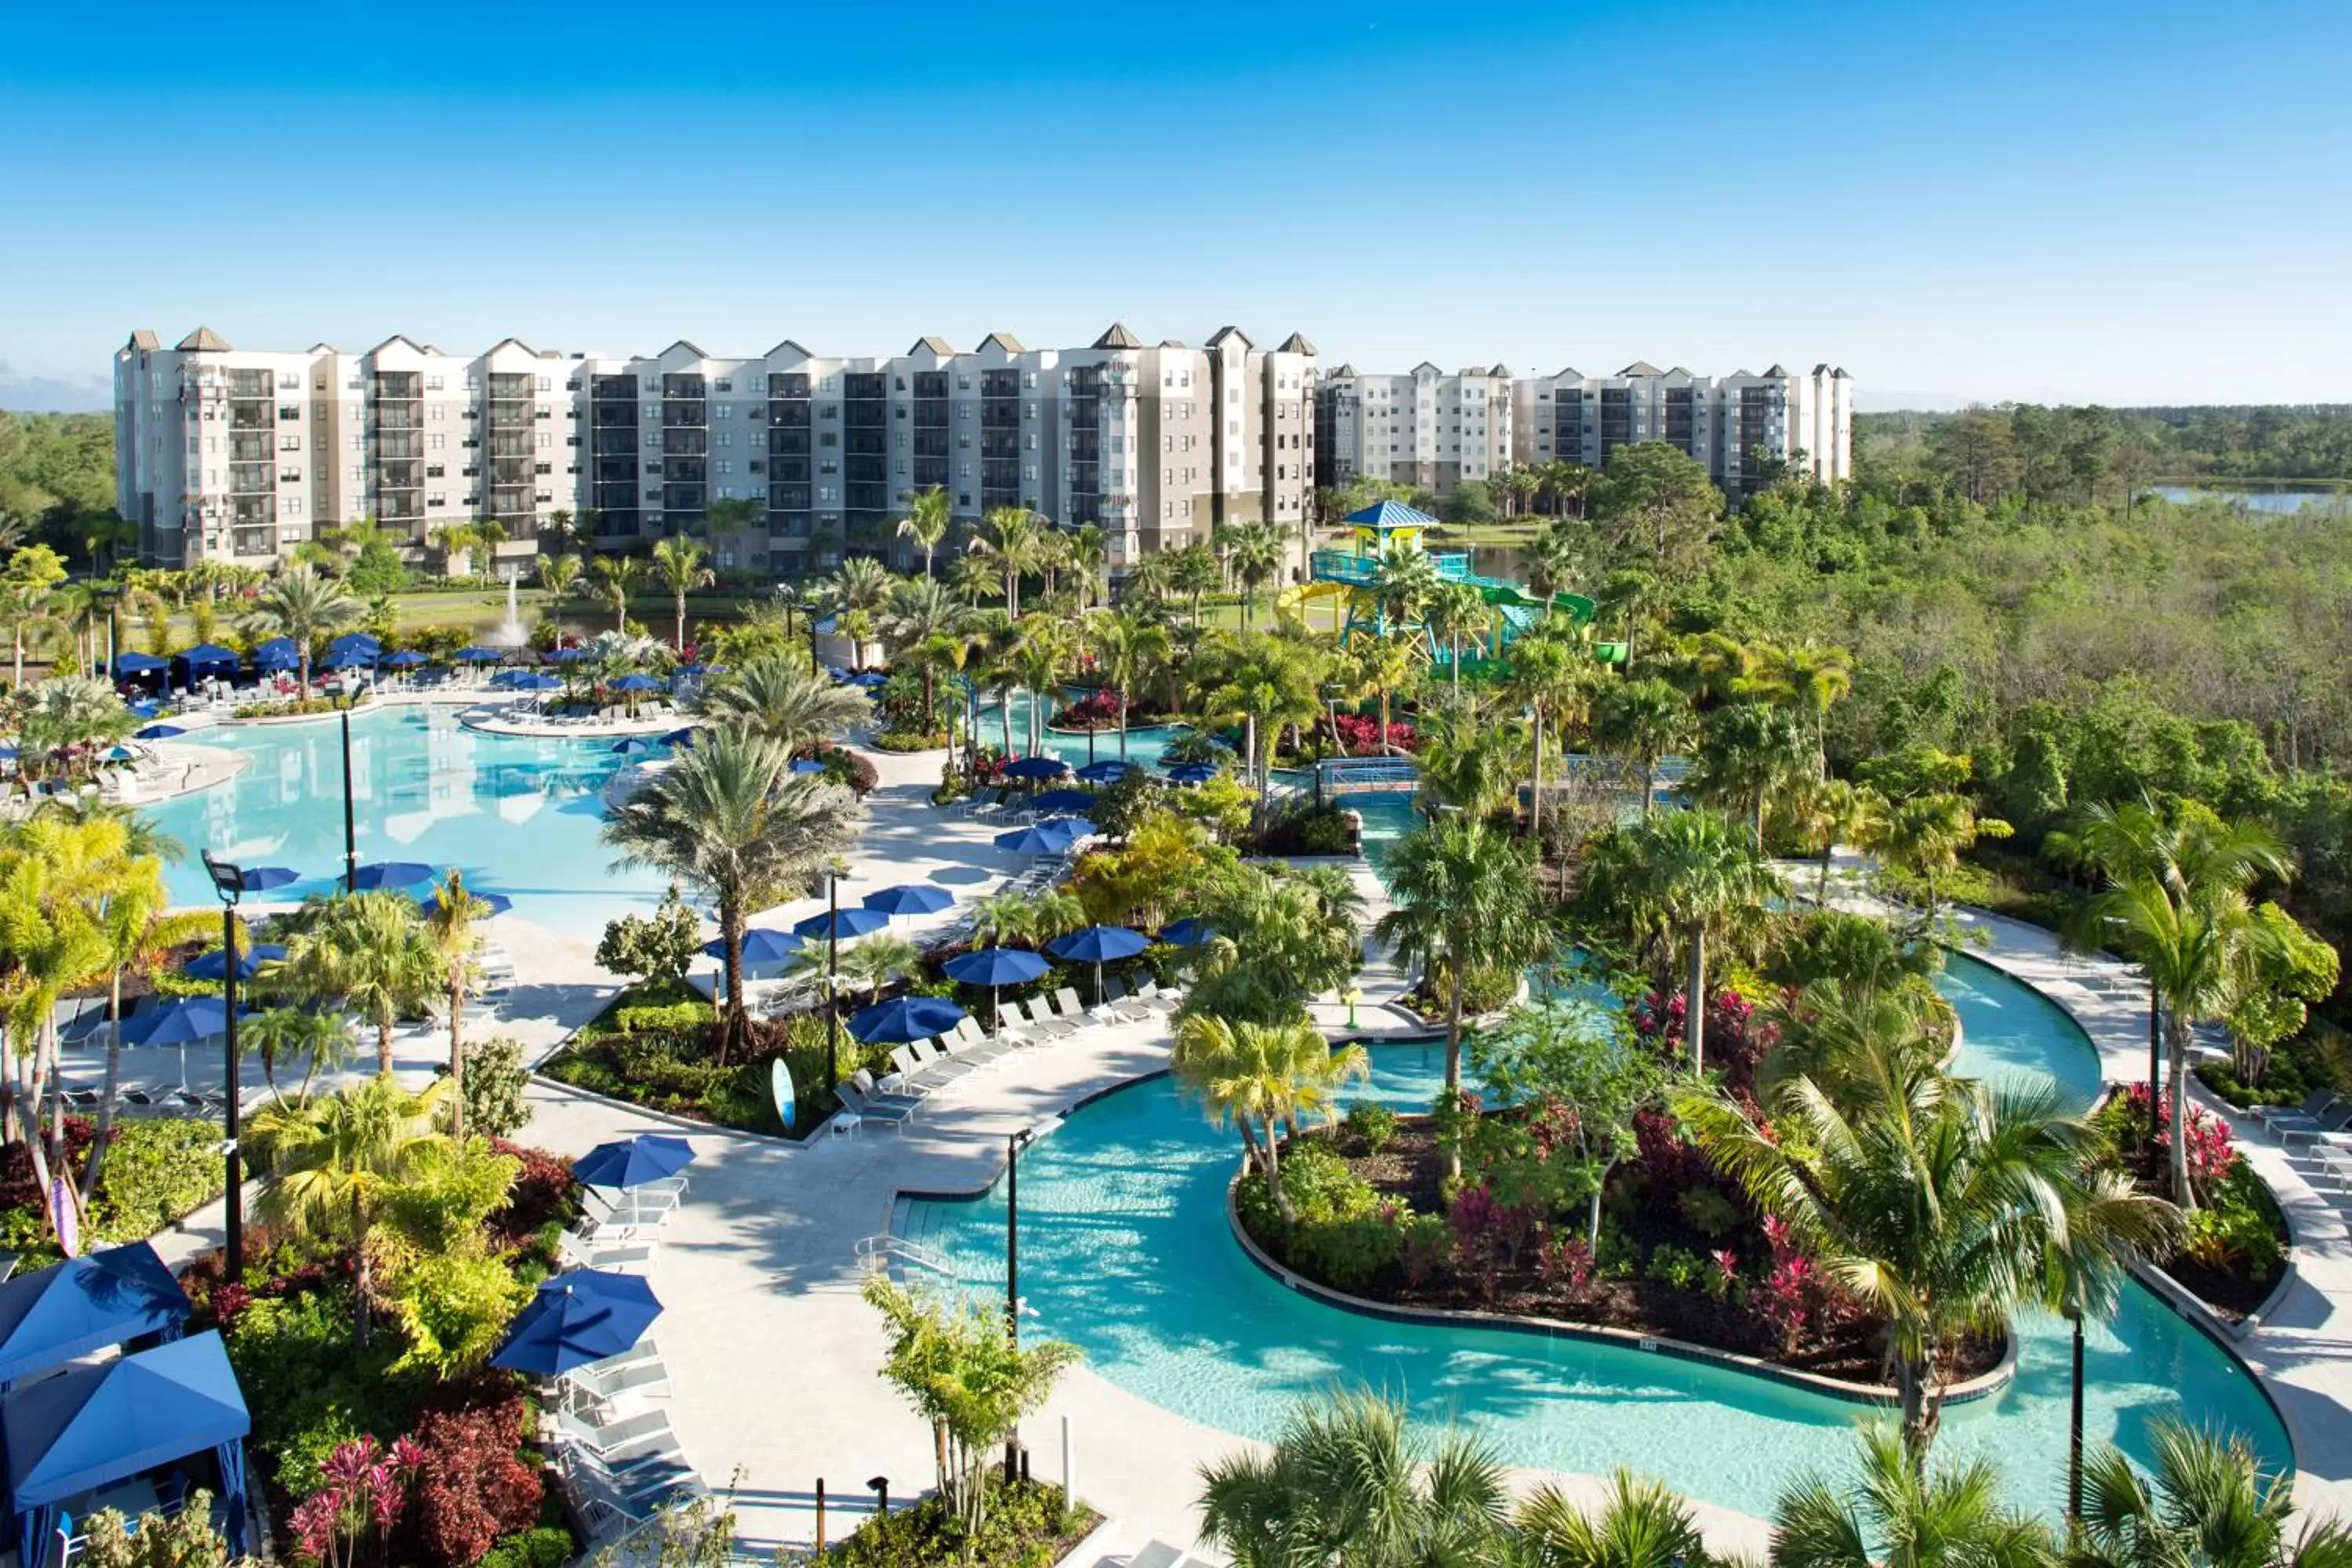 Bird's eye view, Pool View in The Grove Resort & Water Park Orlando